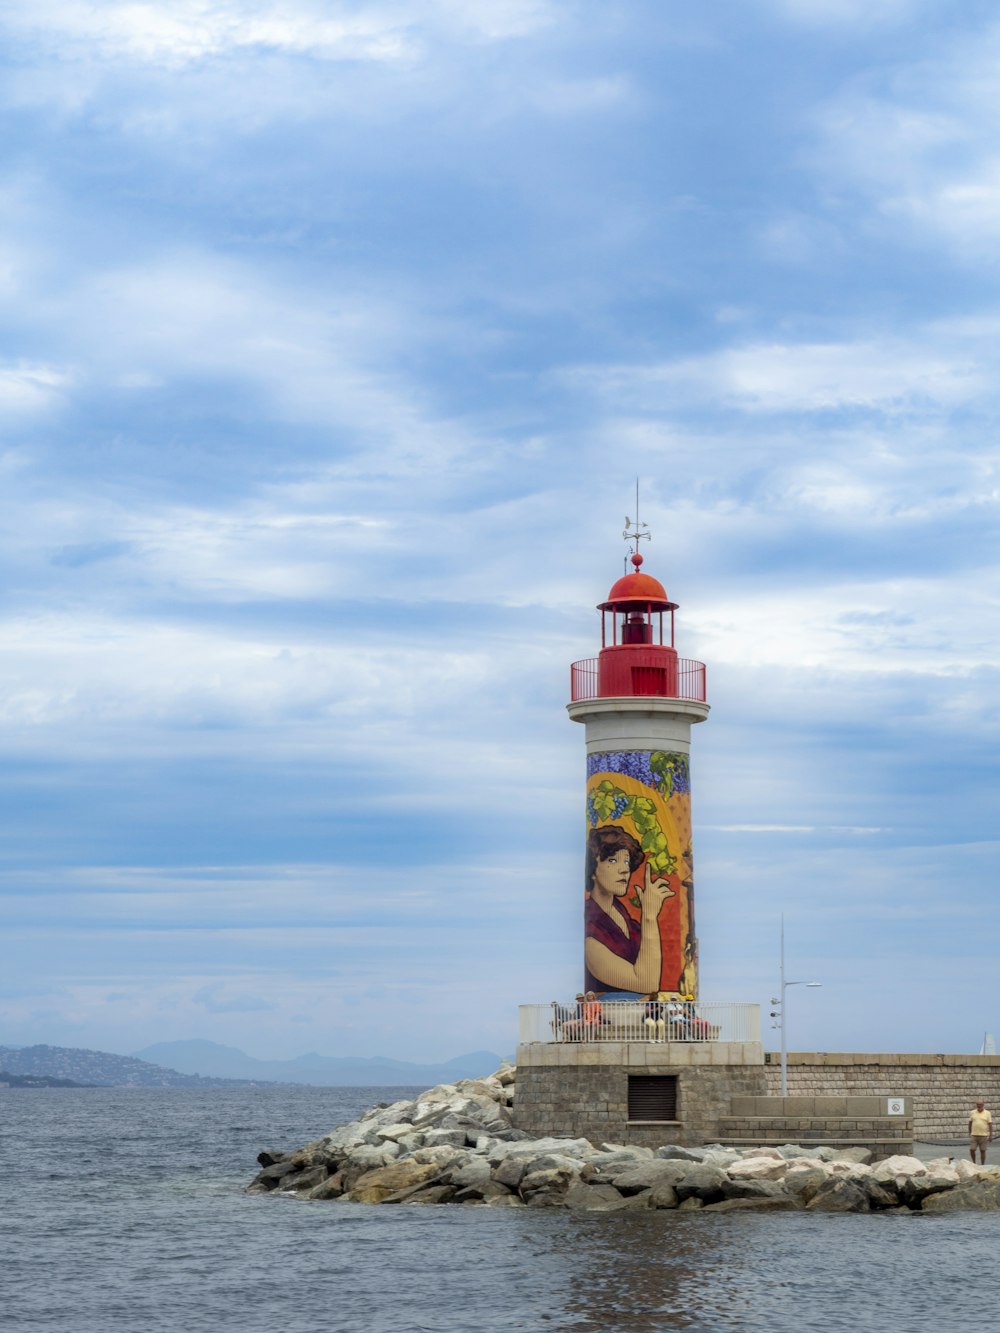 a red and white light house sitting on top of a pier